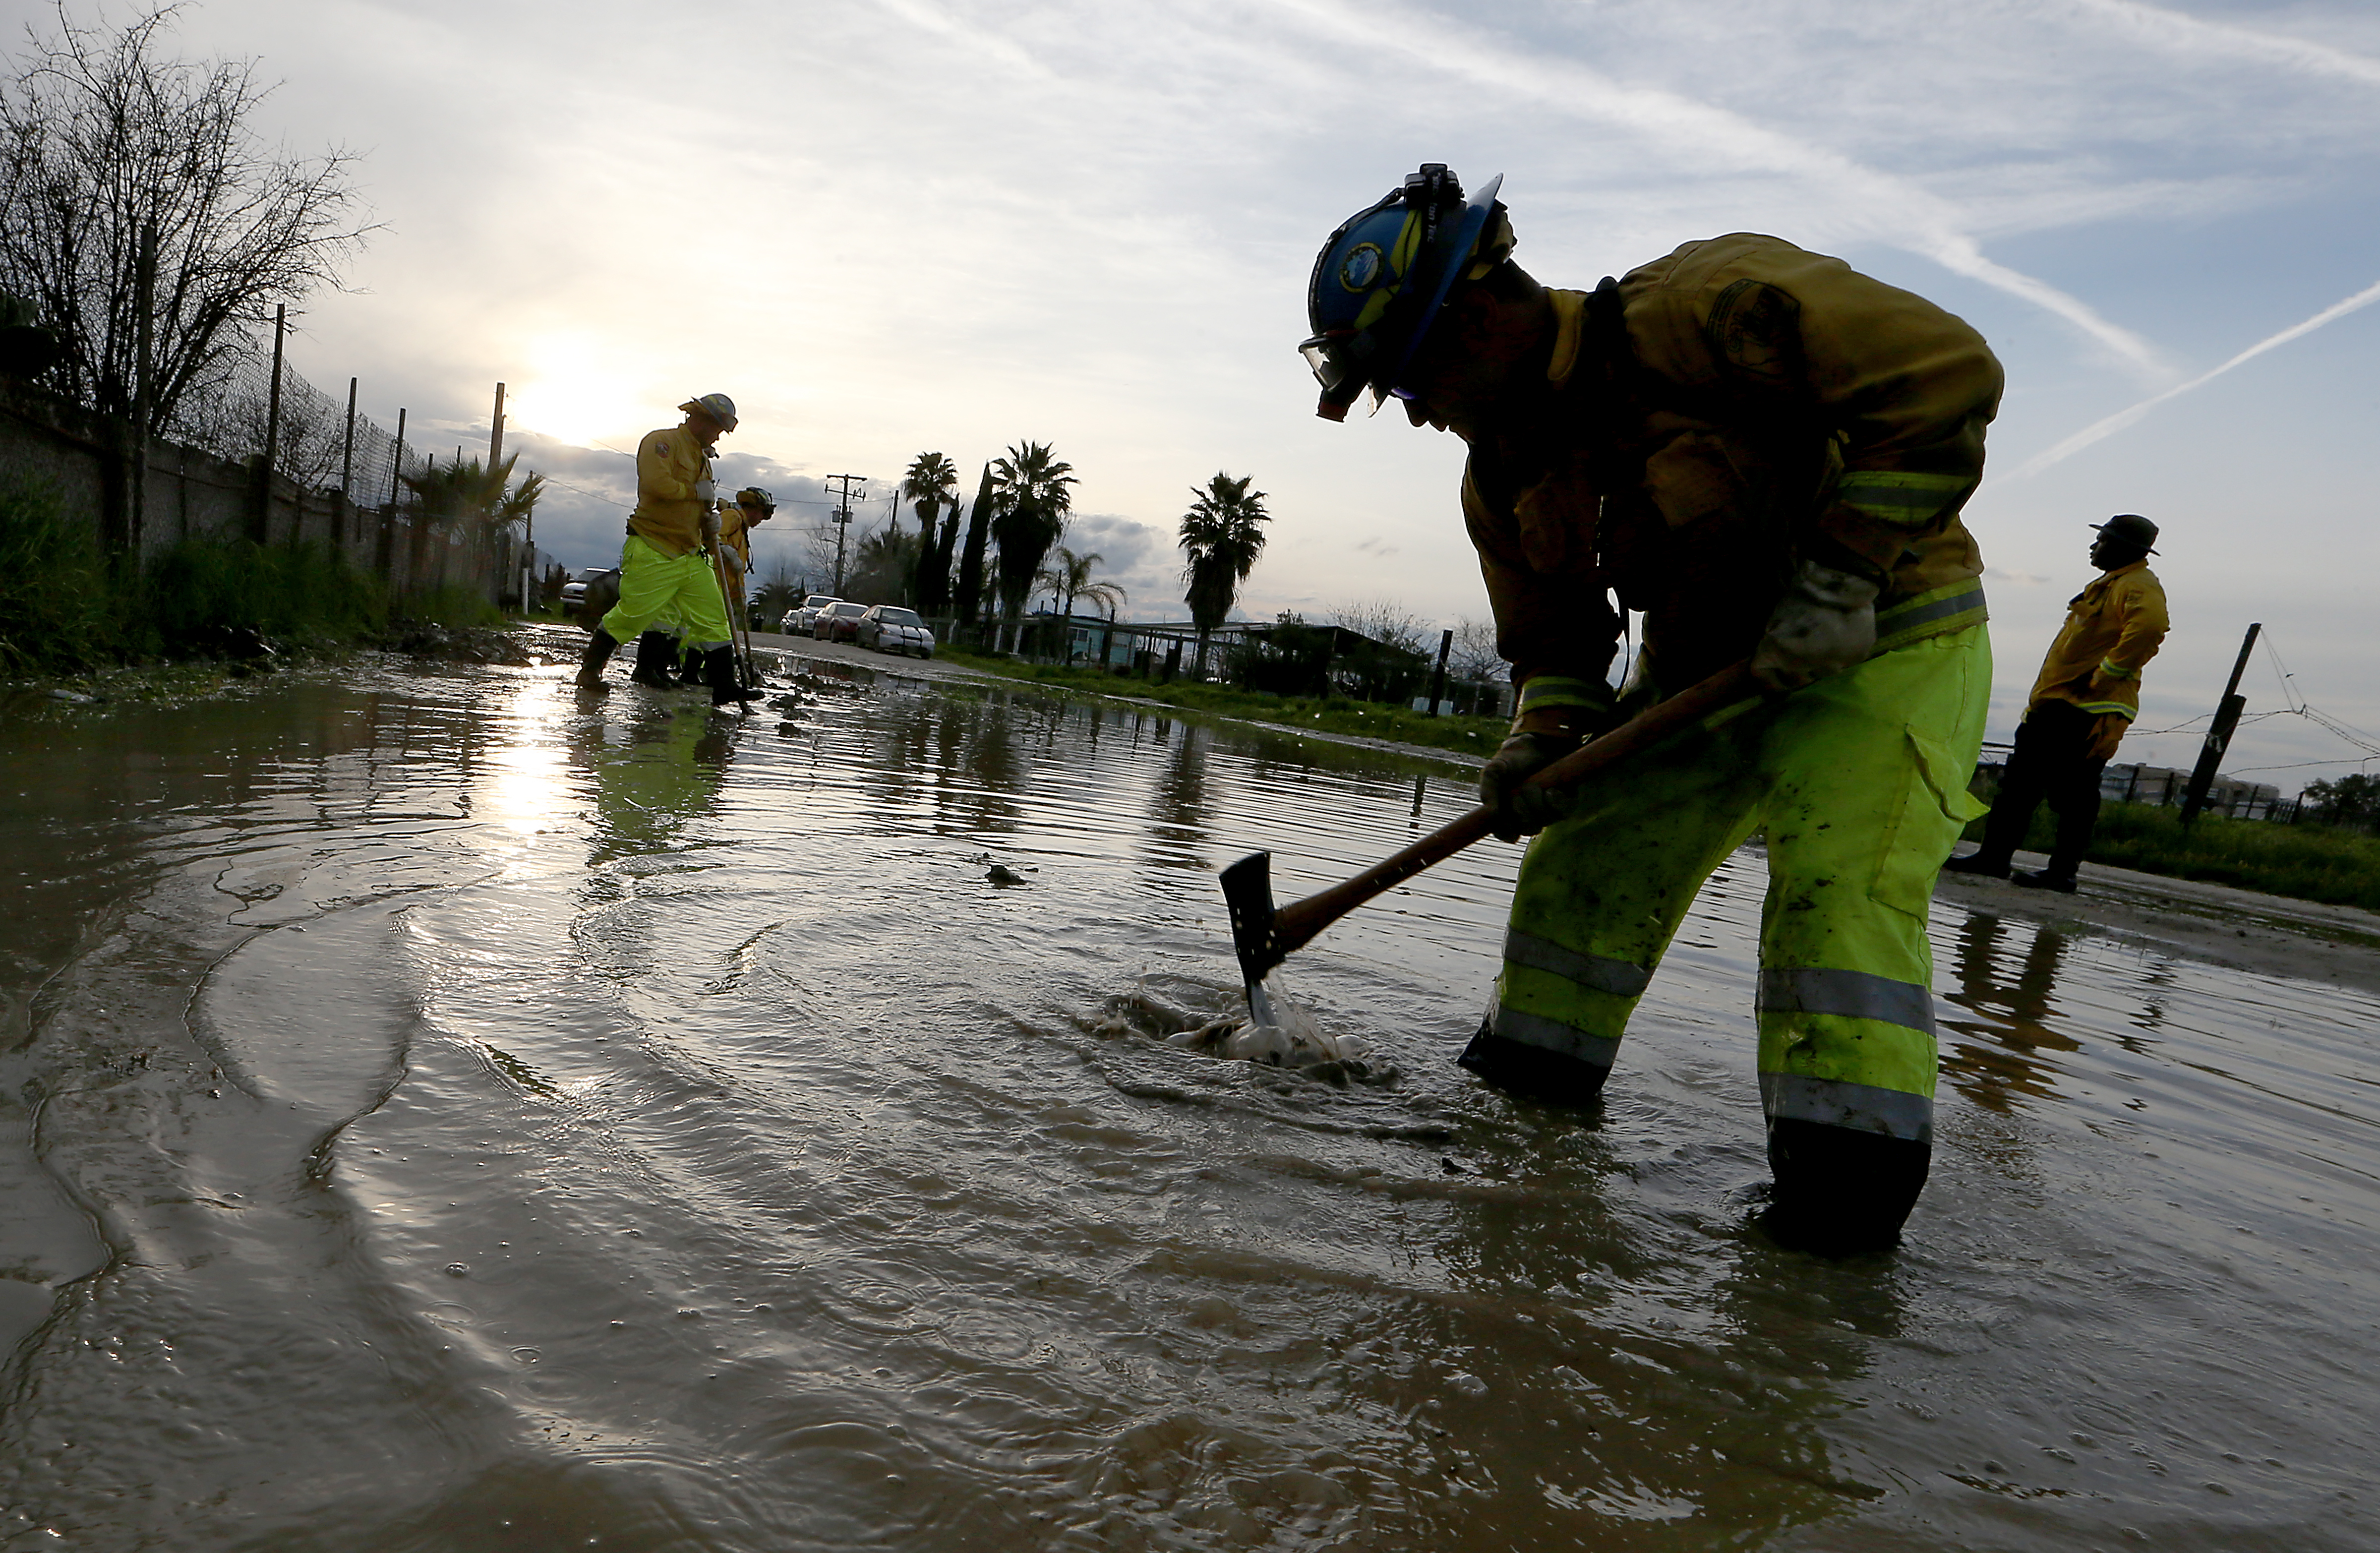 Southern California spring storm brings strong wind, heavy rain